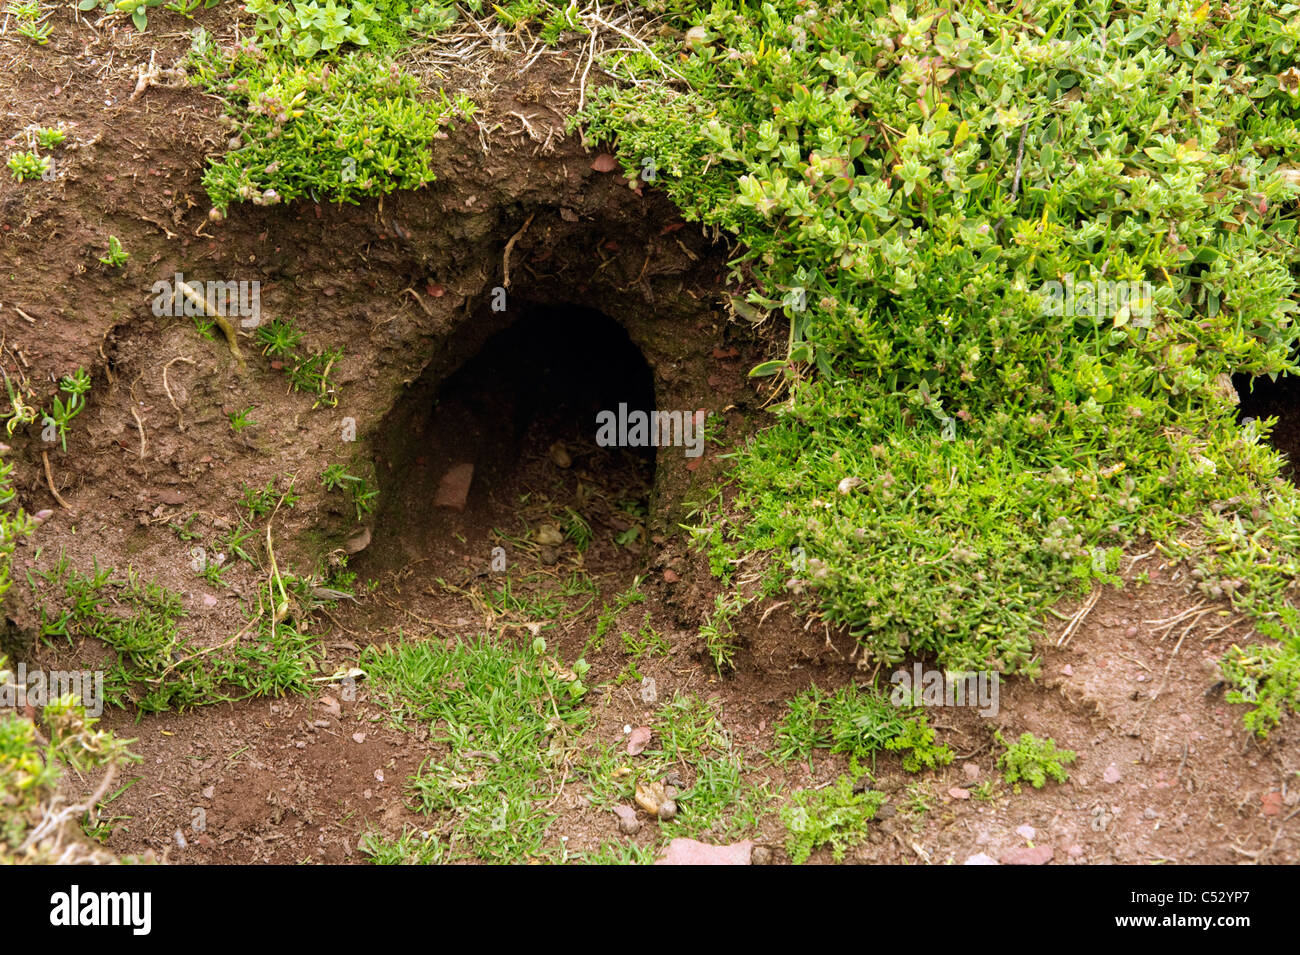 A single Manx Shearwater burrow surrounded by moss on Skokholm island Pembrokeshire South Wales UK Stock Photo